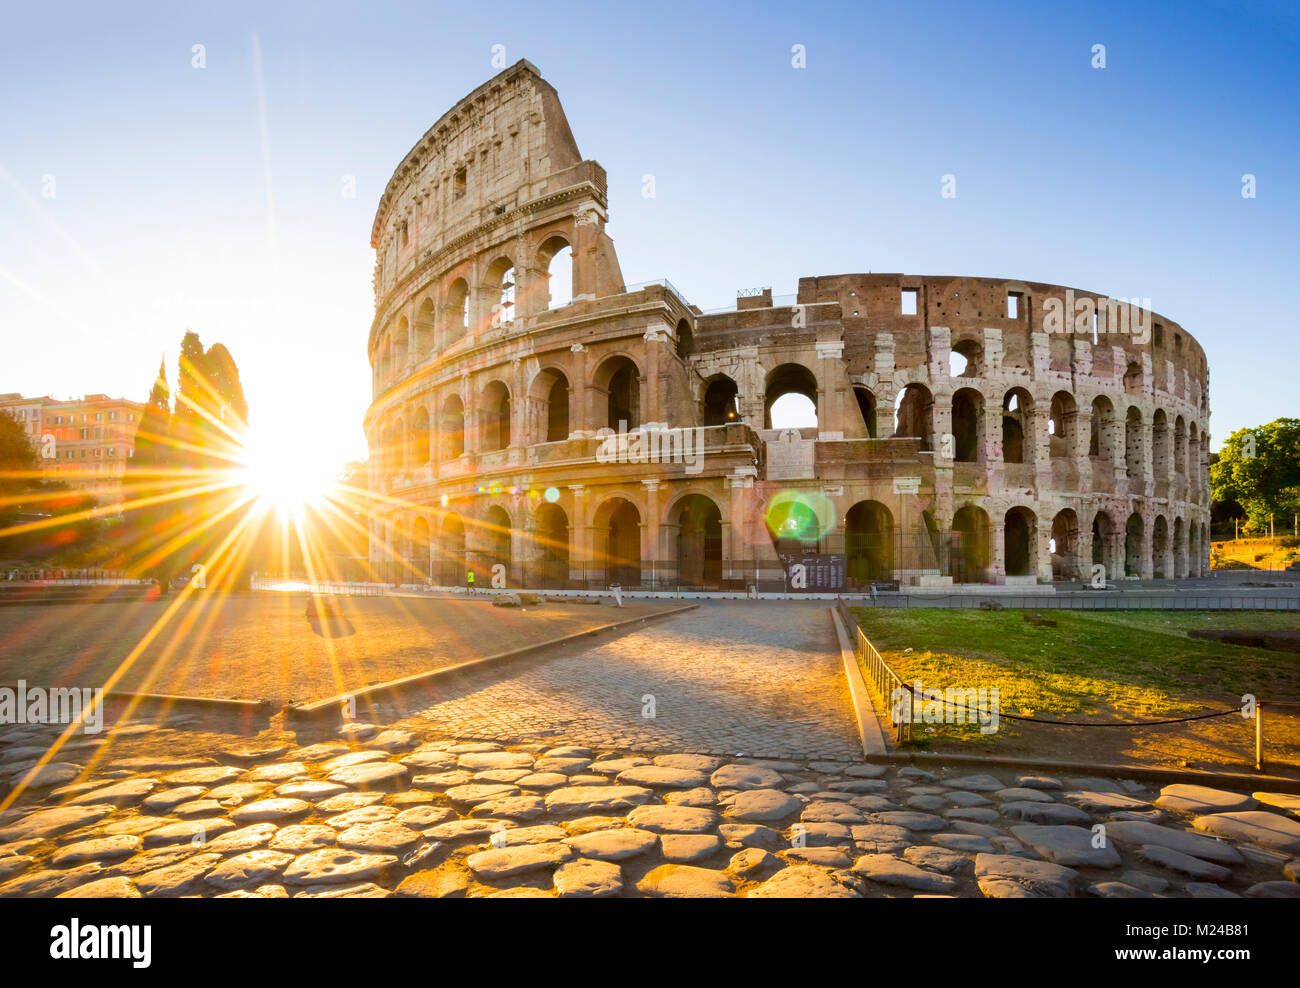 Colosseum at sunrise, Rome. Rome architecture and landmark. Rome Colosseum  is one of the best known monuments of Rome and Italy Stock Photo - Alamy